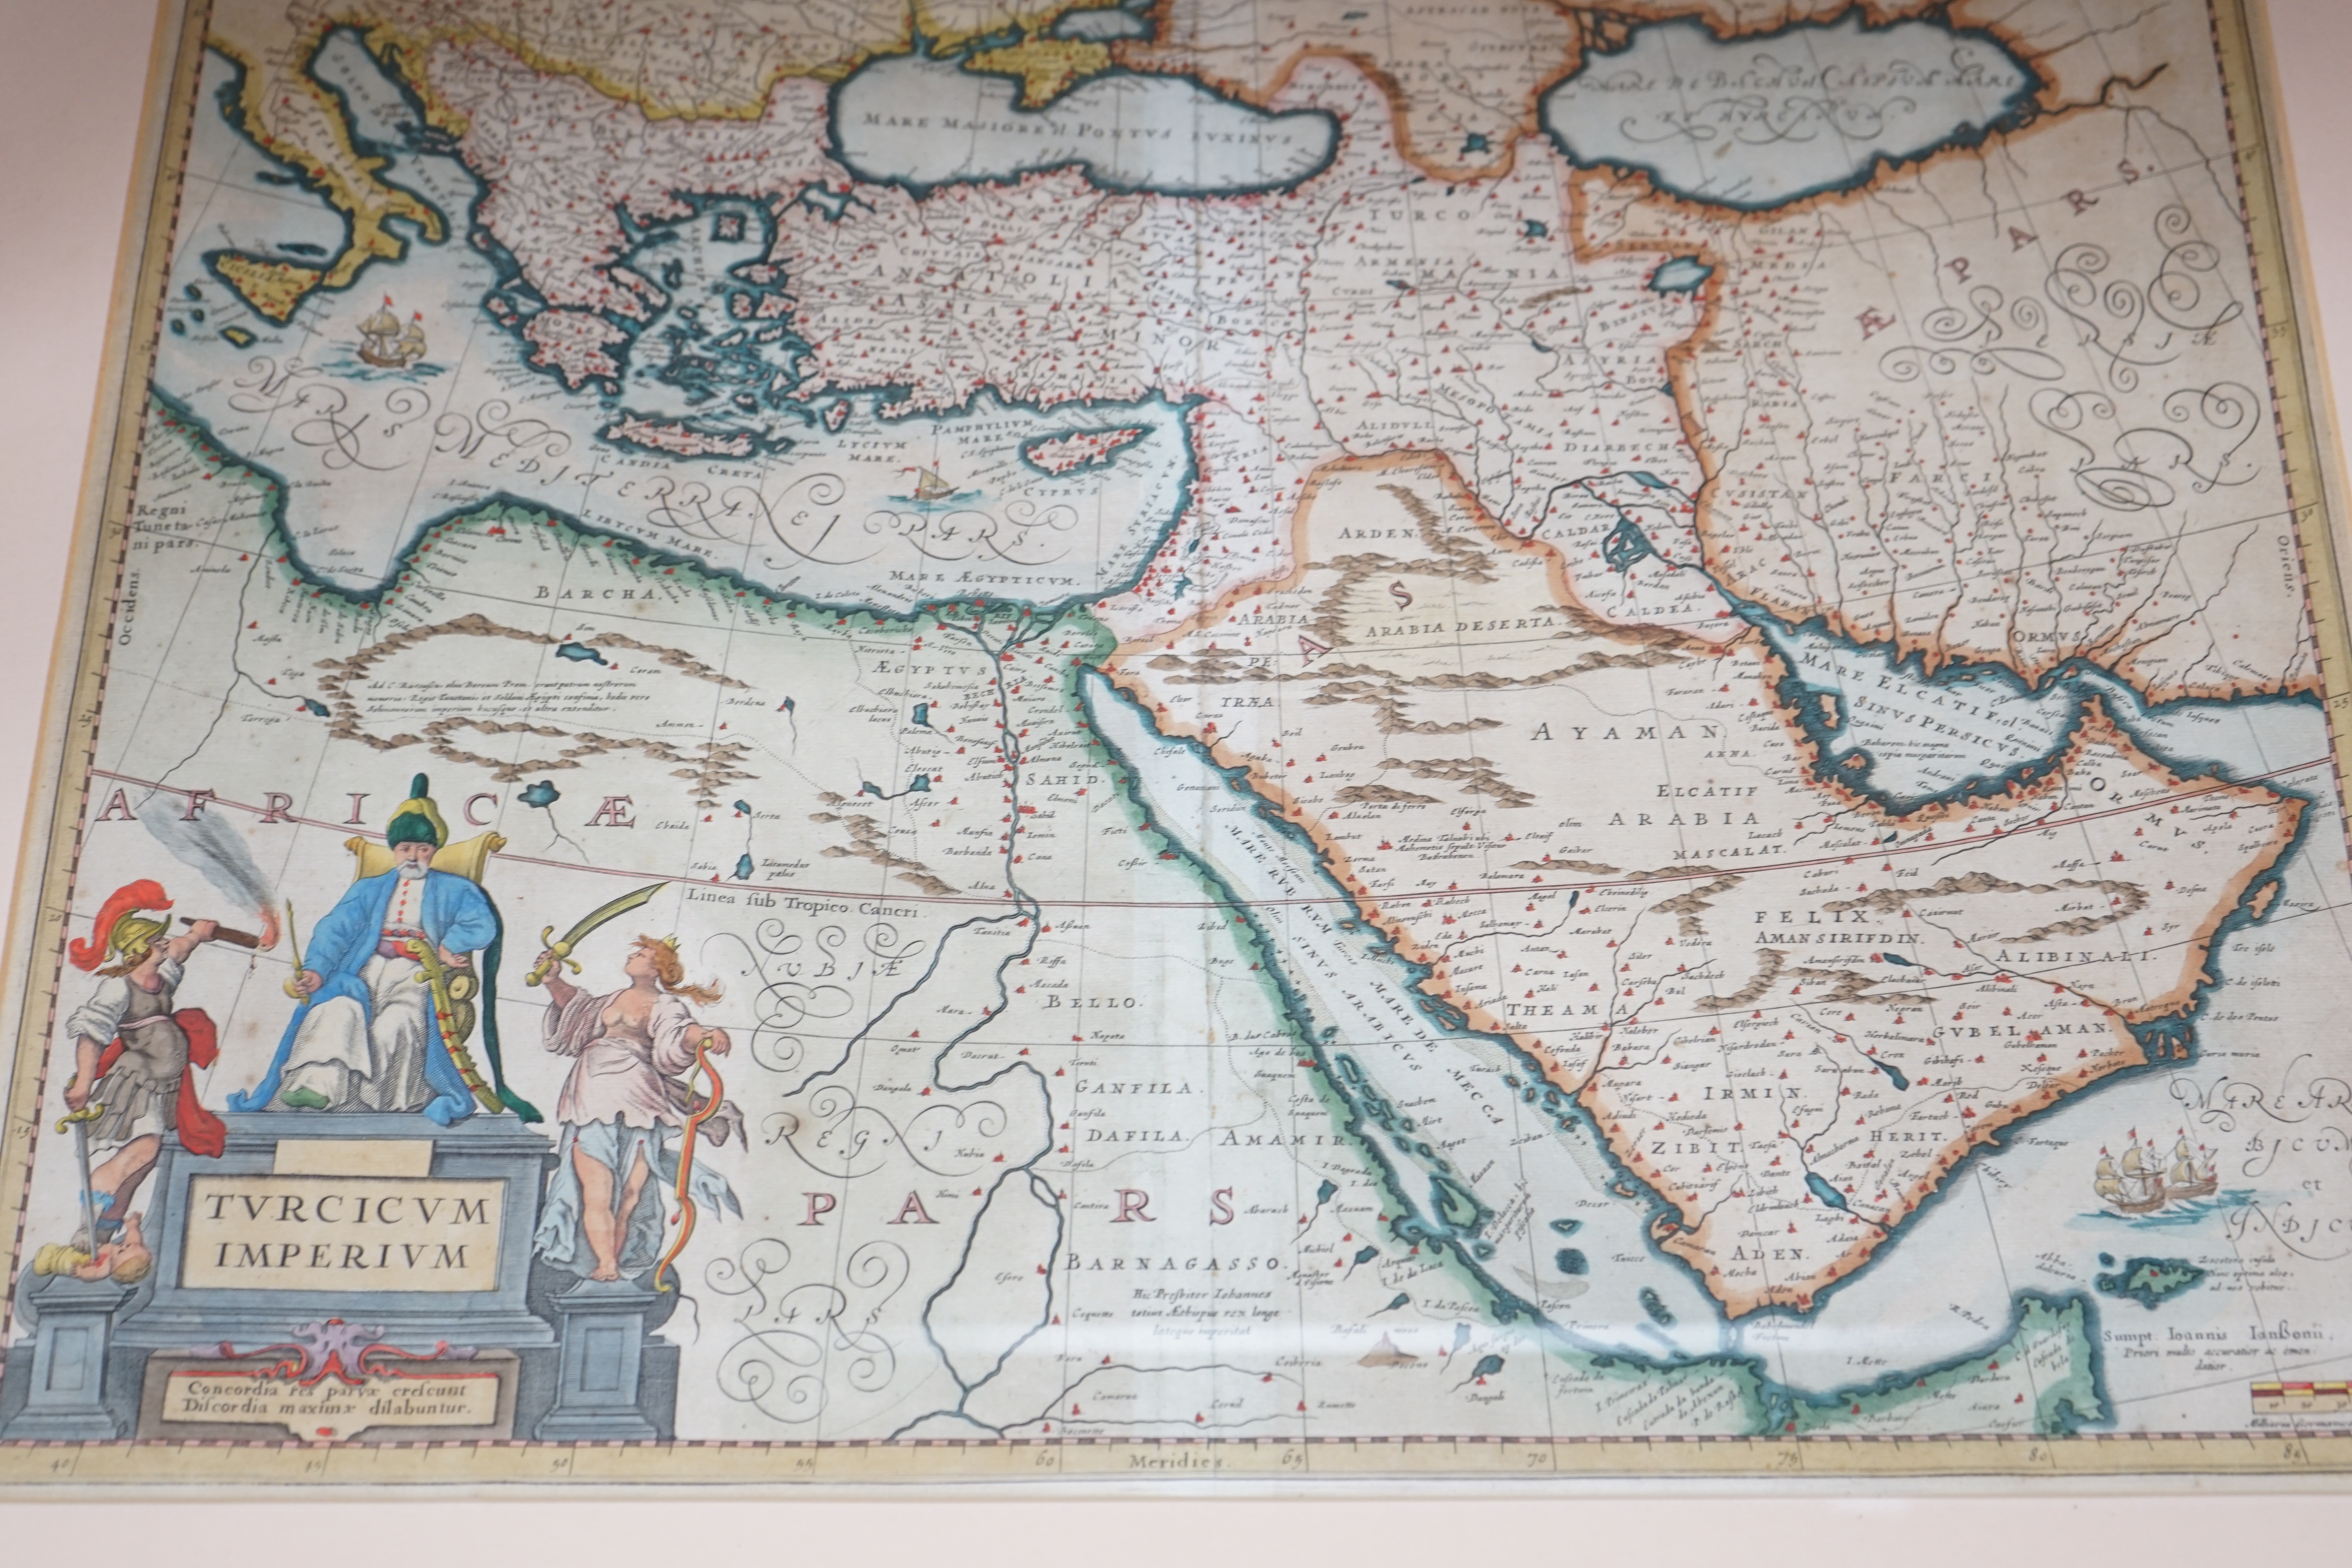 After Jan Jansson (1588-1664), hand coloured engraved map of The Turkish Empire, 41 x 52cm. Condition - fair, crease to centre, some browning and light foxing